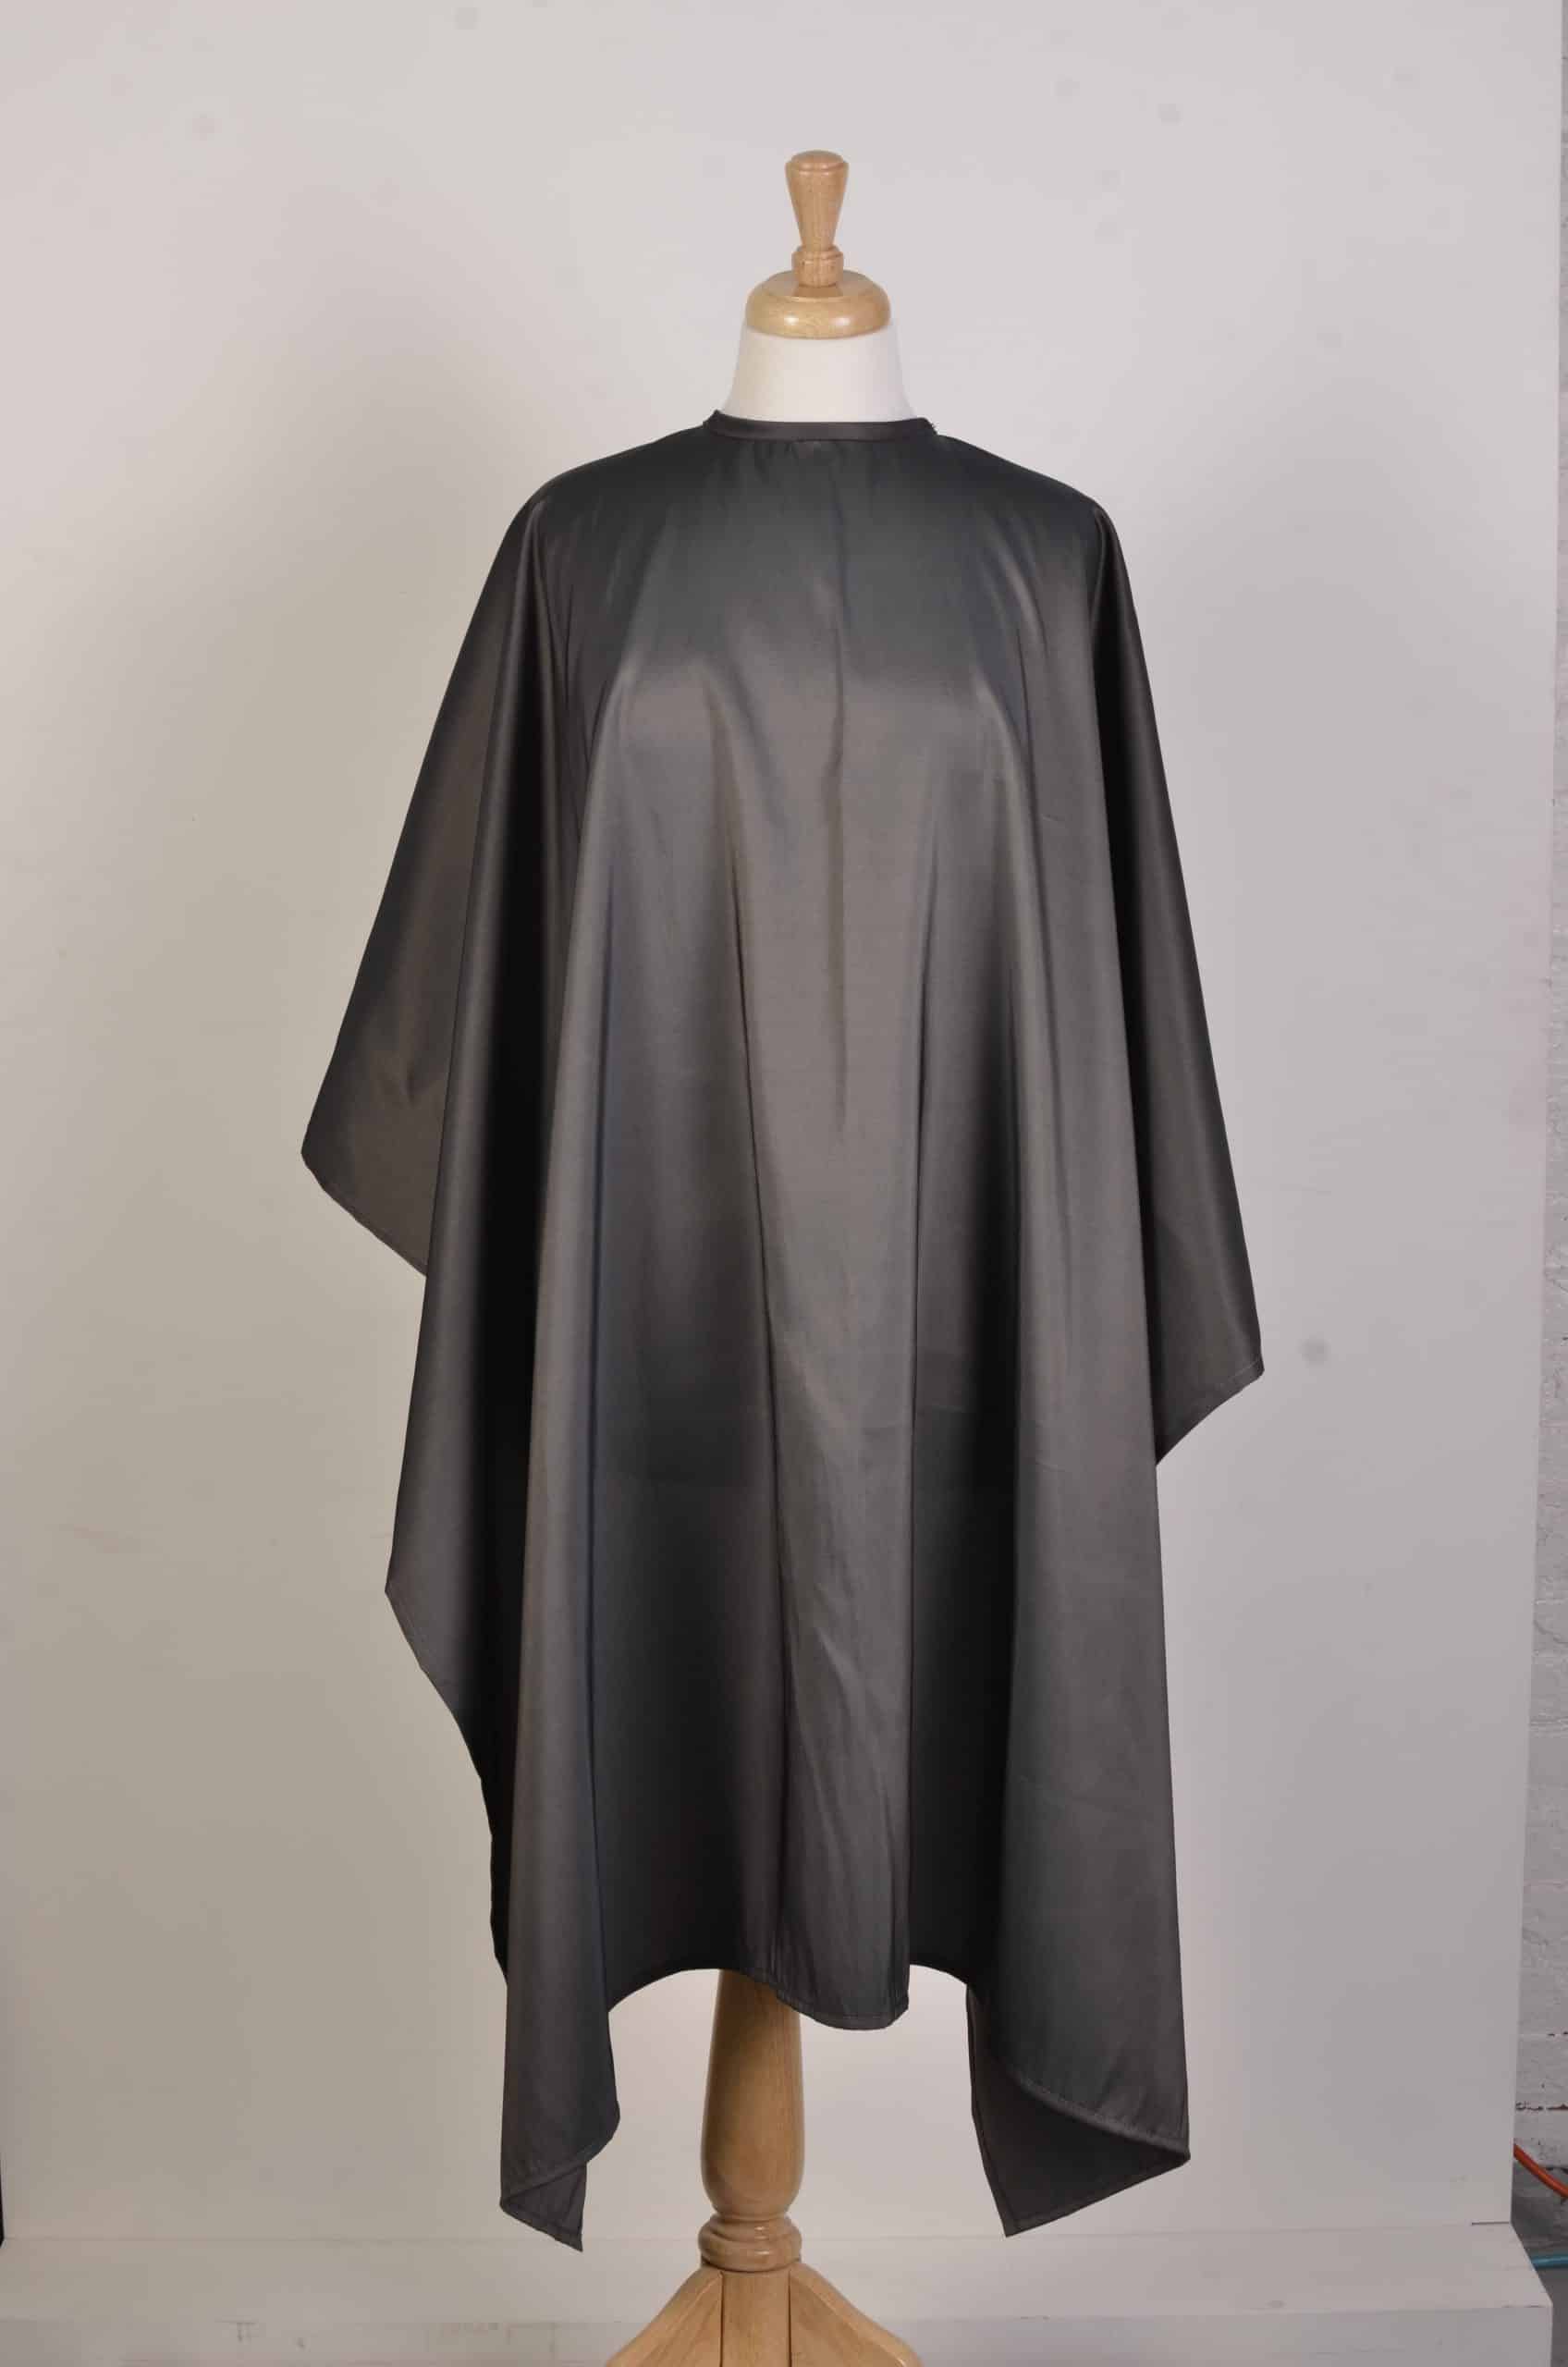 Style # 920N Over Sized Cutting and Chemical Cape